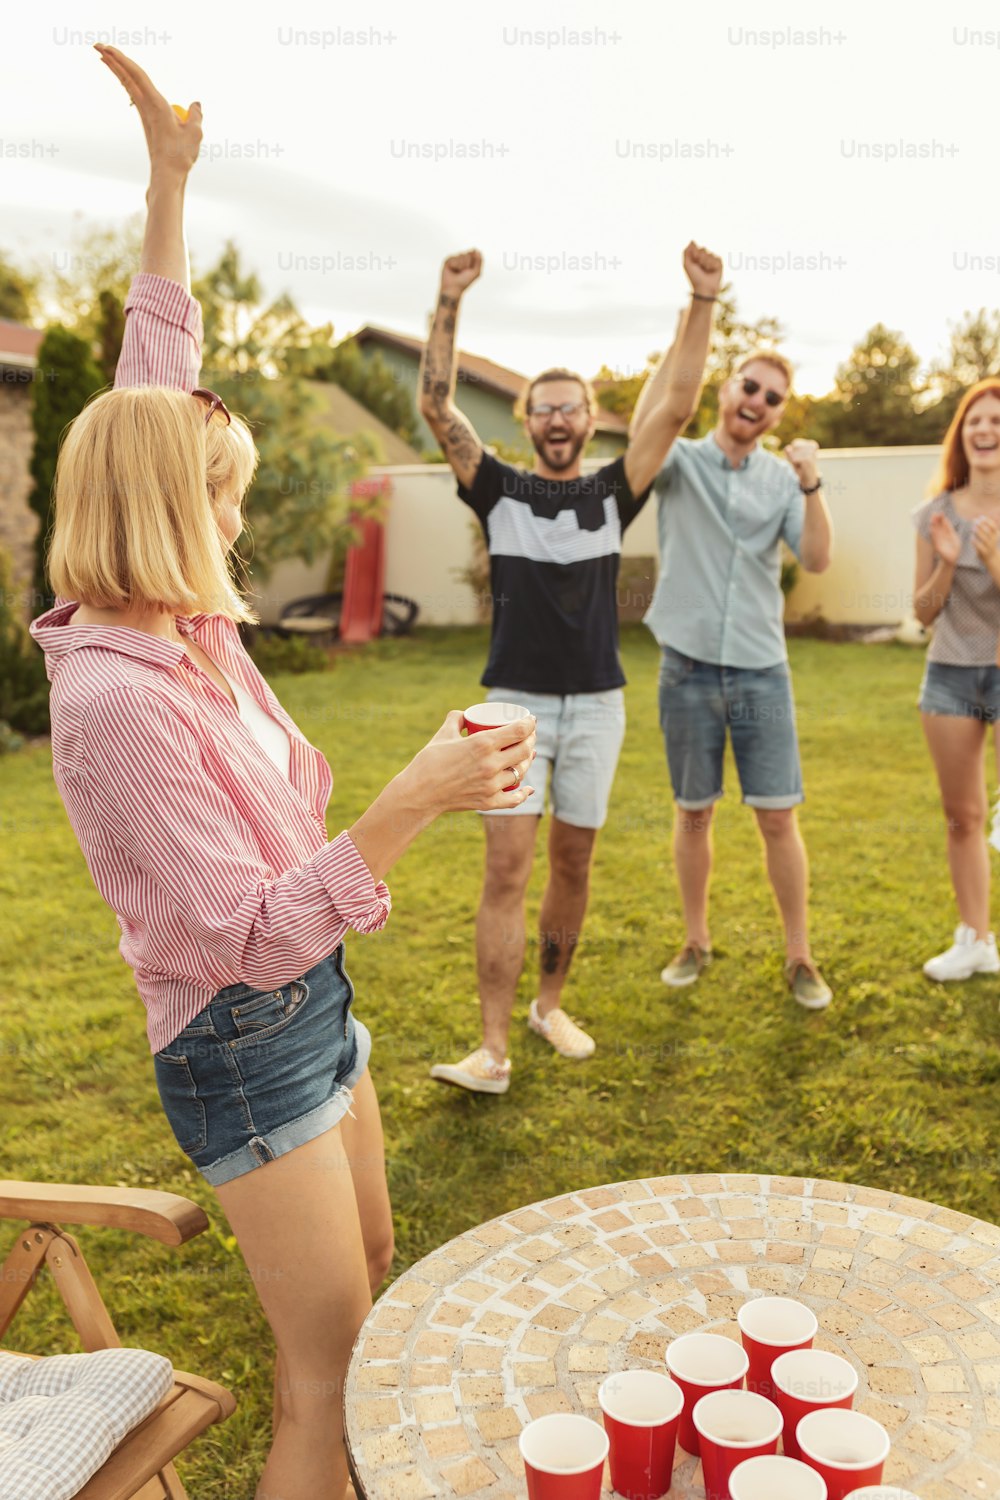 Group of cheerful young friends having fun while playing beer pong at backyard summertime party, cheering for each other